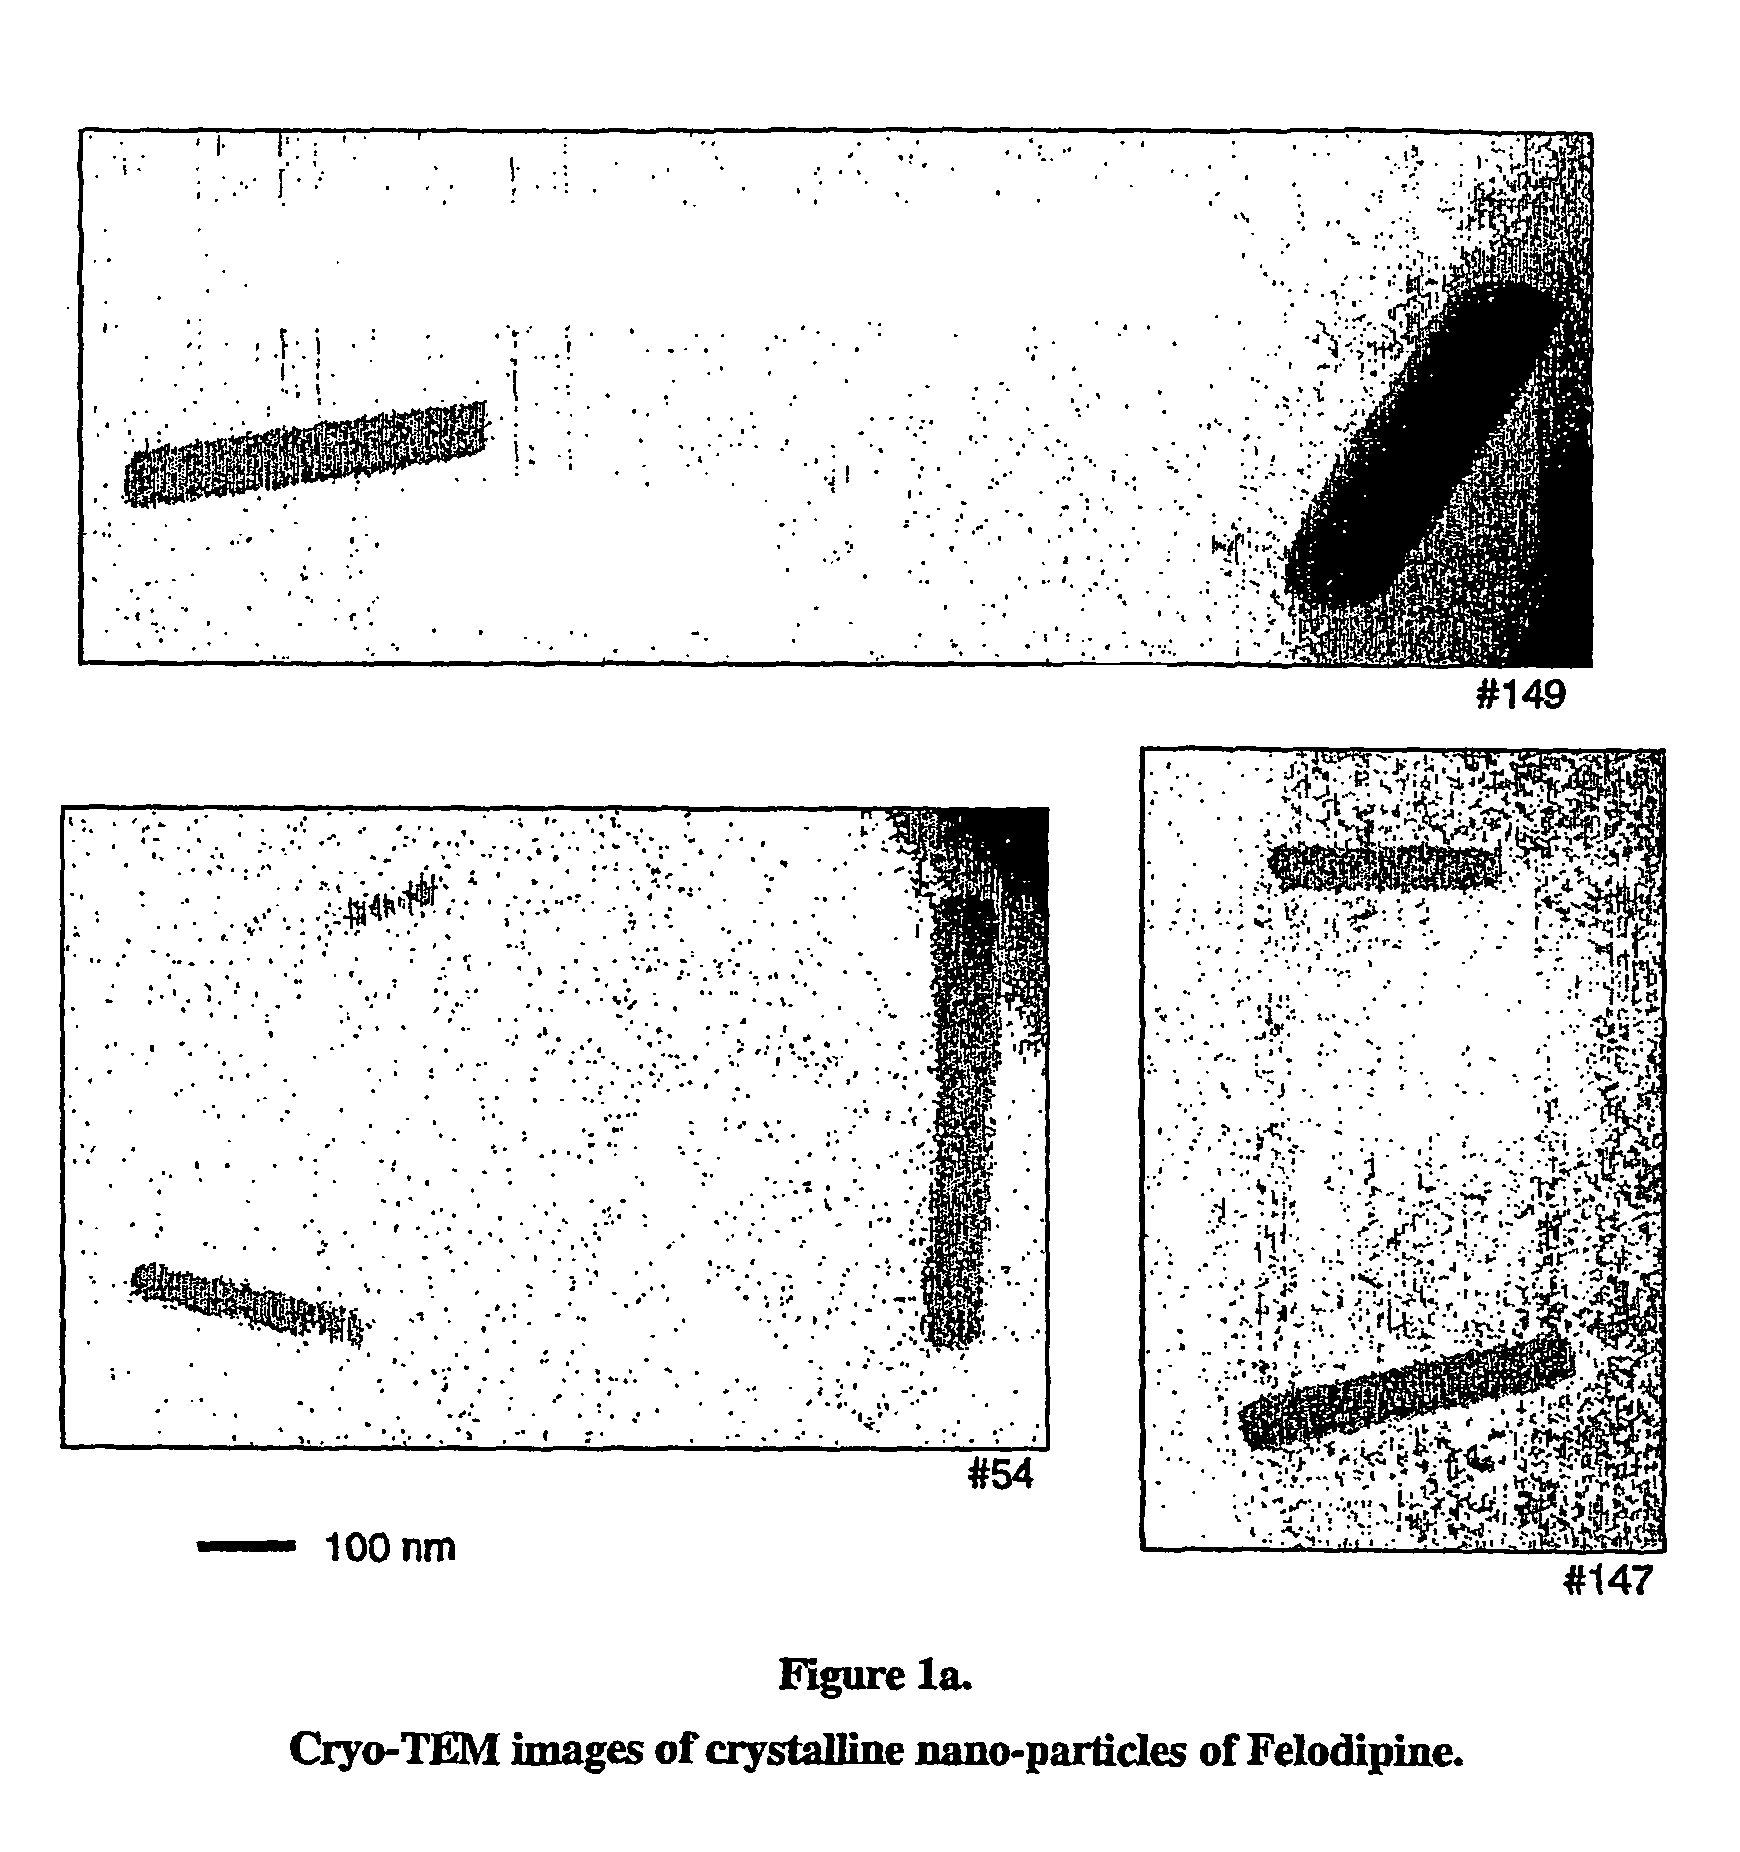 Process for the preparation of crystalline nano-particle dispersions